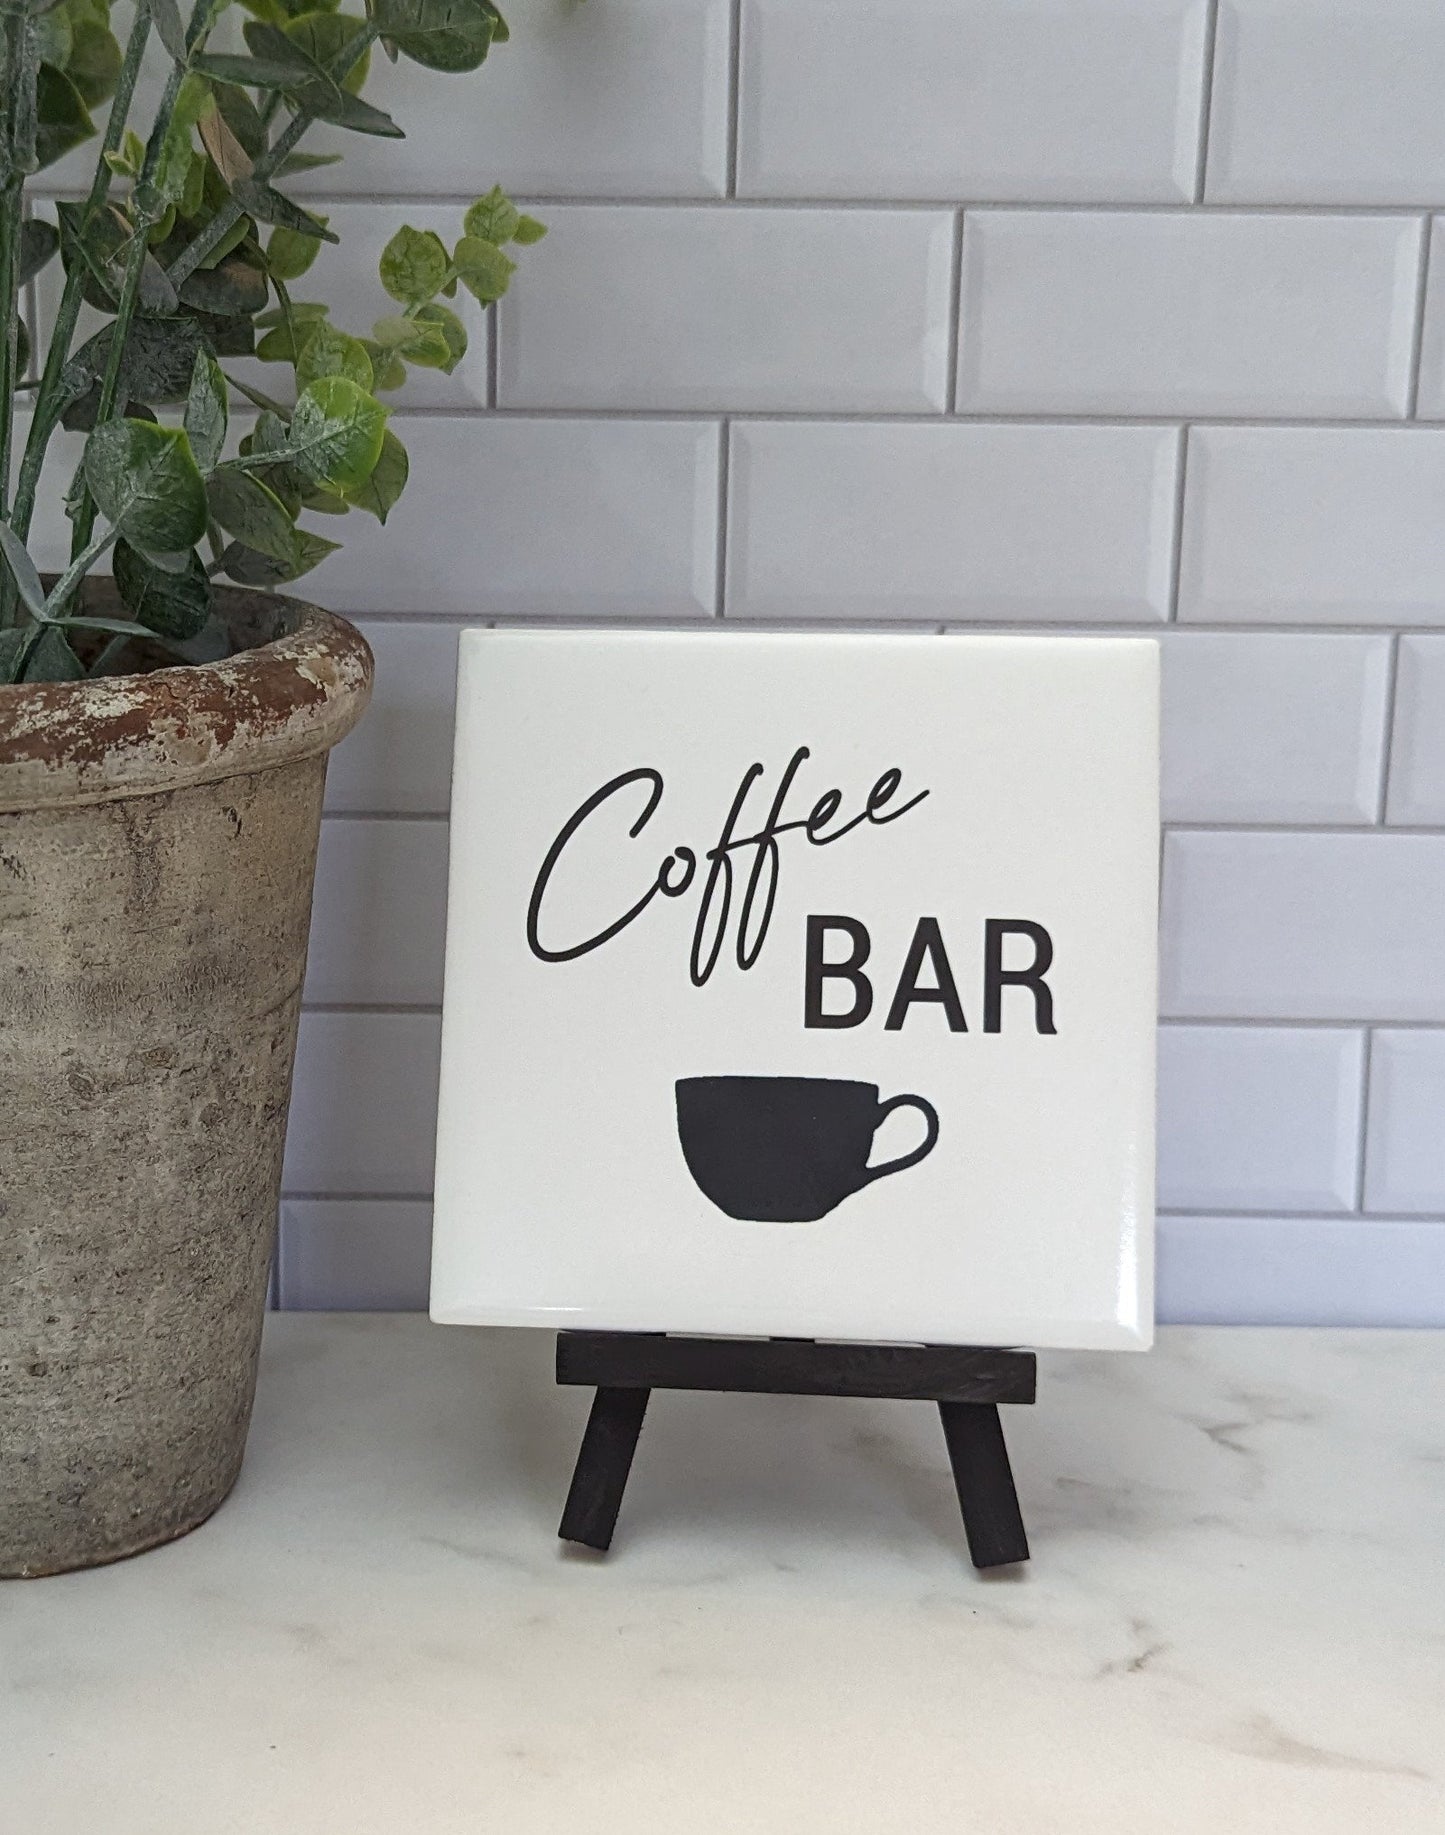 If you love me you'll bring me coffee sign, easel sign, fresh brewed coffee tile sign - easel included, your color choice